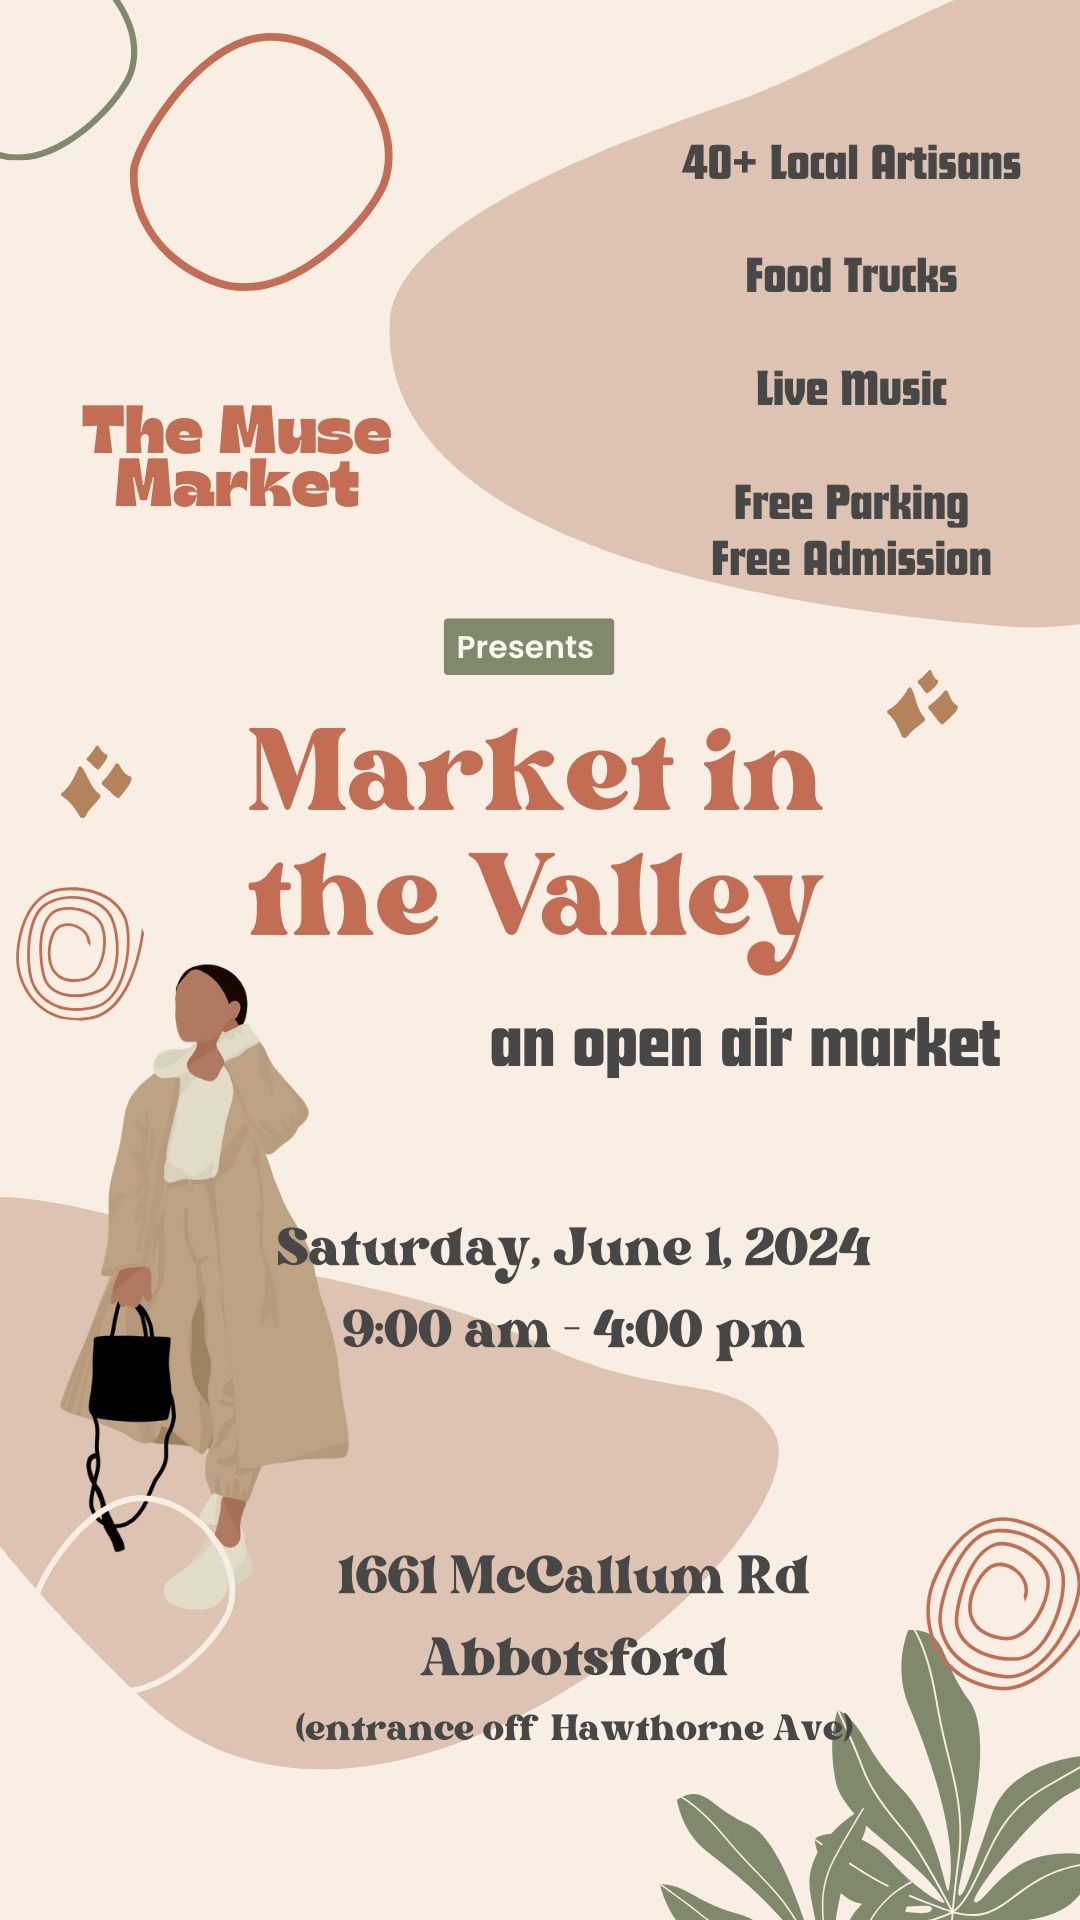 Market in the Valley